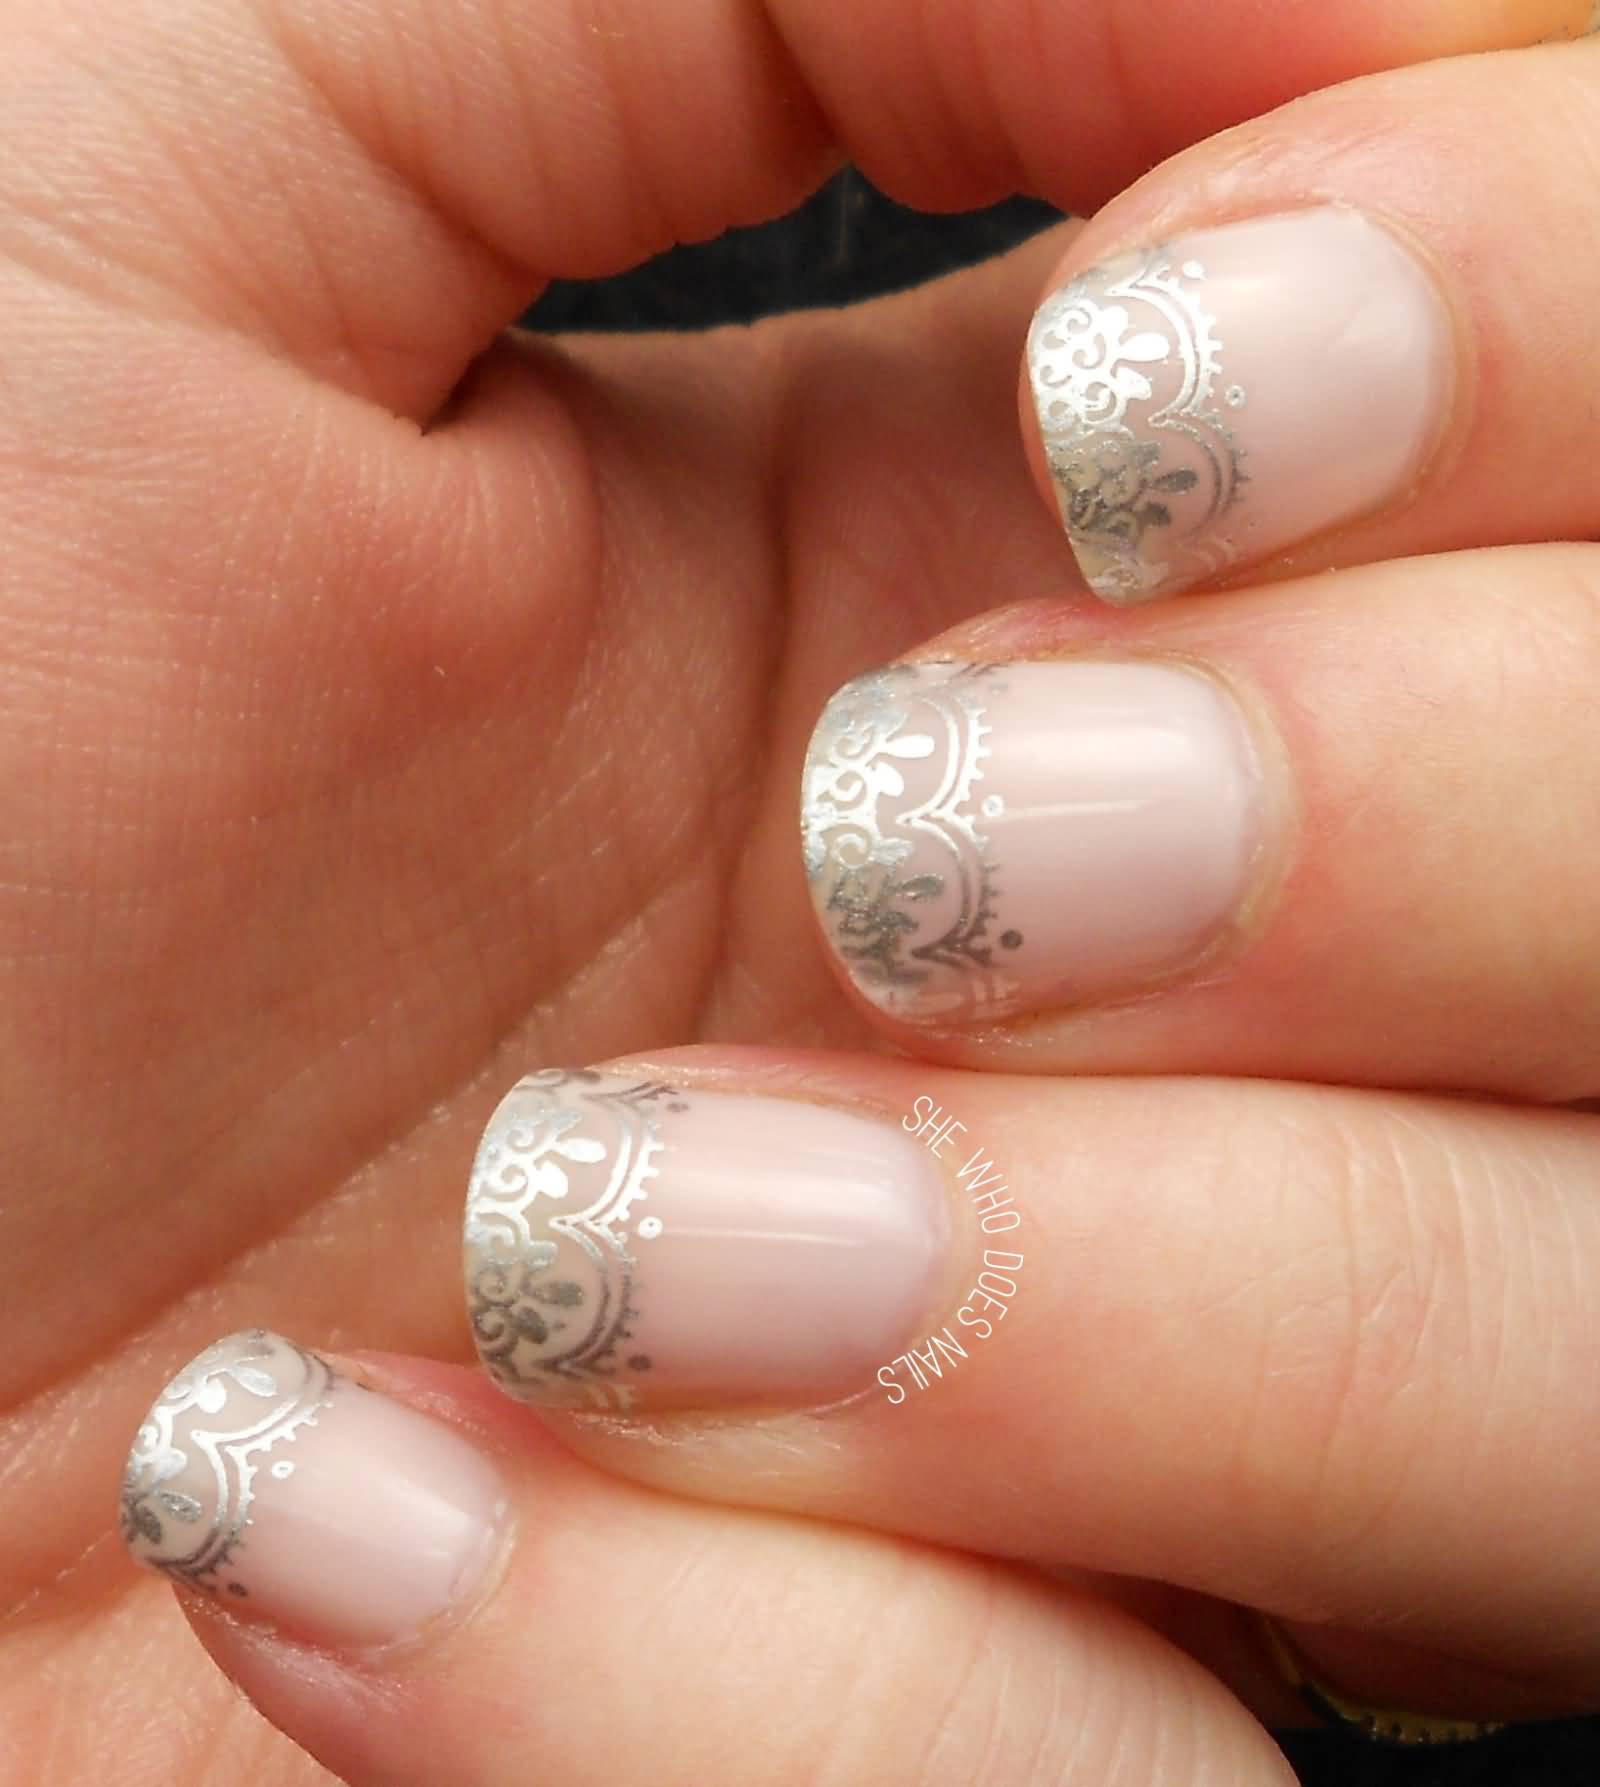 French Tip Nail Designs For Wedding
 35 Most Beautiful Wedding Lace Nail Art Designs